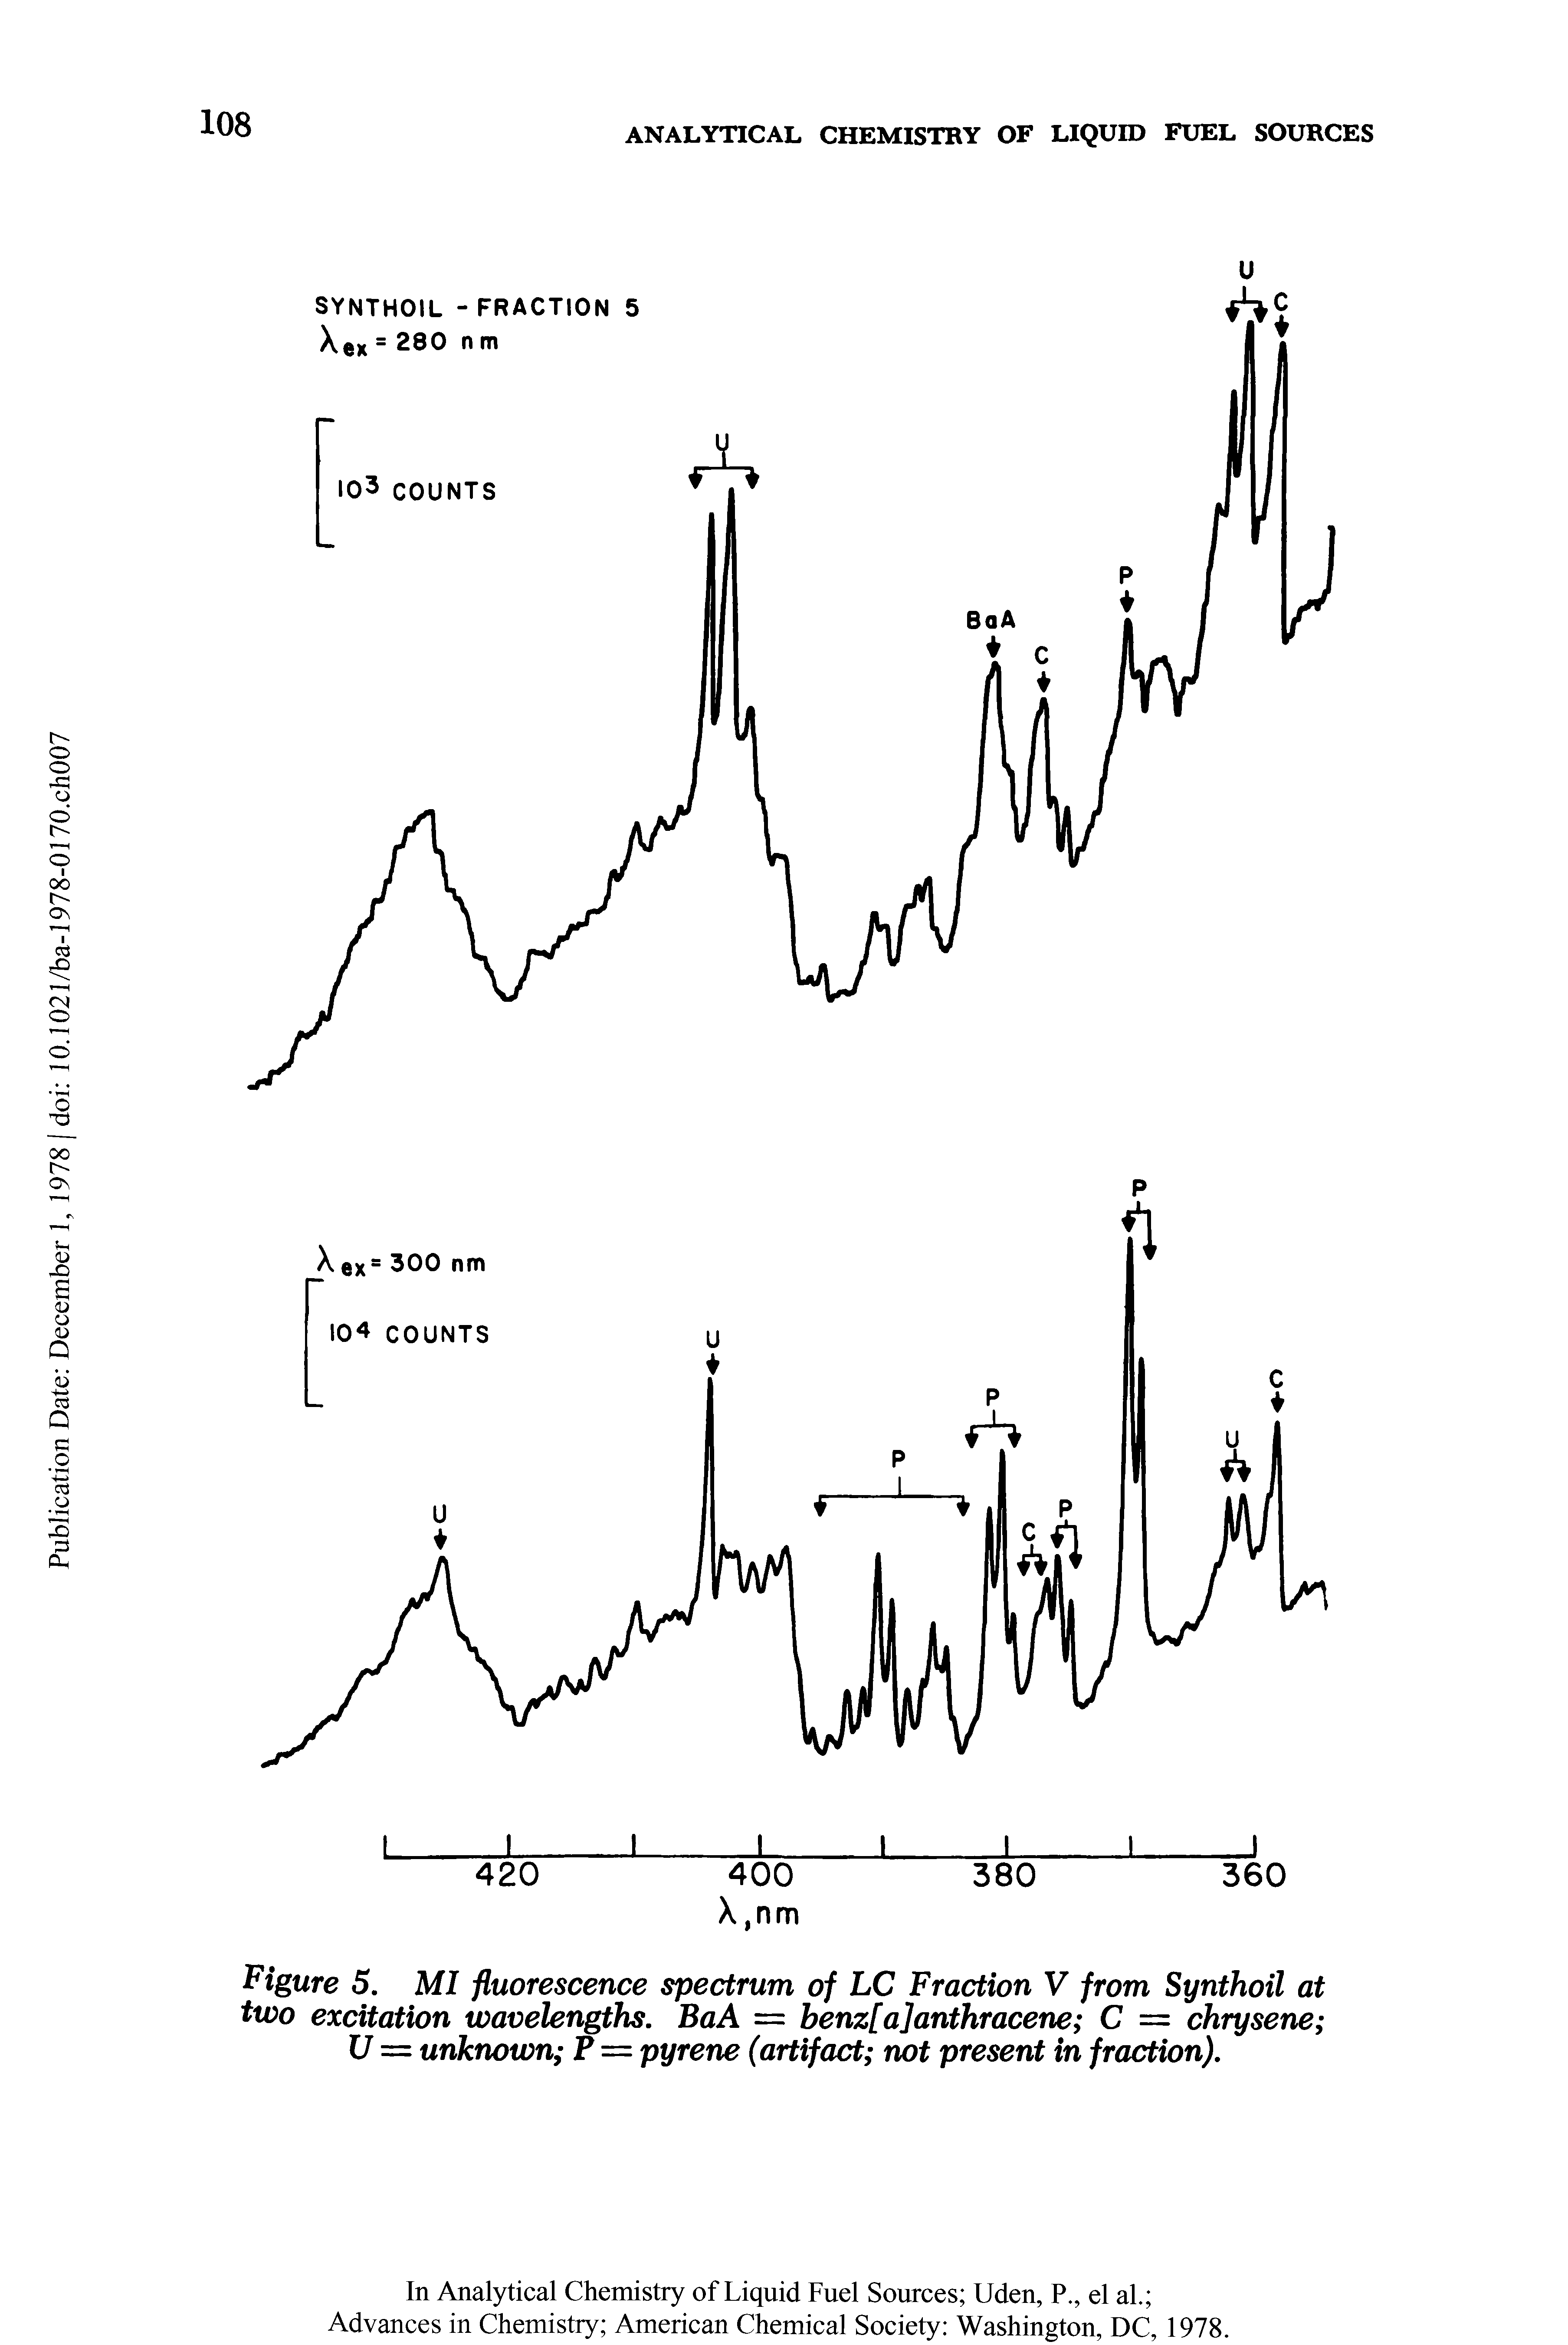 Figure 5. MI fluorescence spectrum of LC Fraction V from Synthoil at two excitation wavelengths. BaA = benz[a]anthracene C = chrysene U = unknown P = pyrene (artifact not present in fraction).